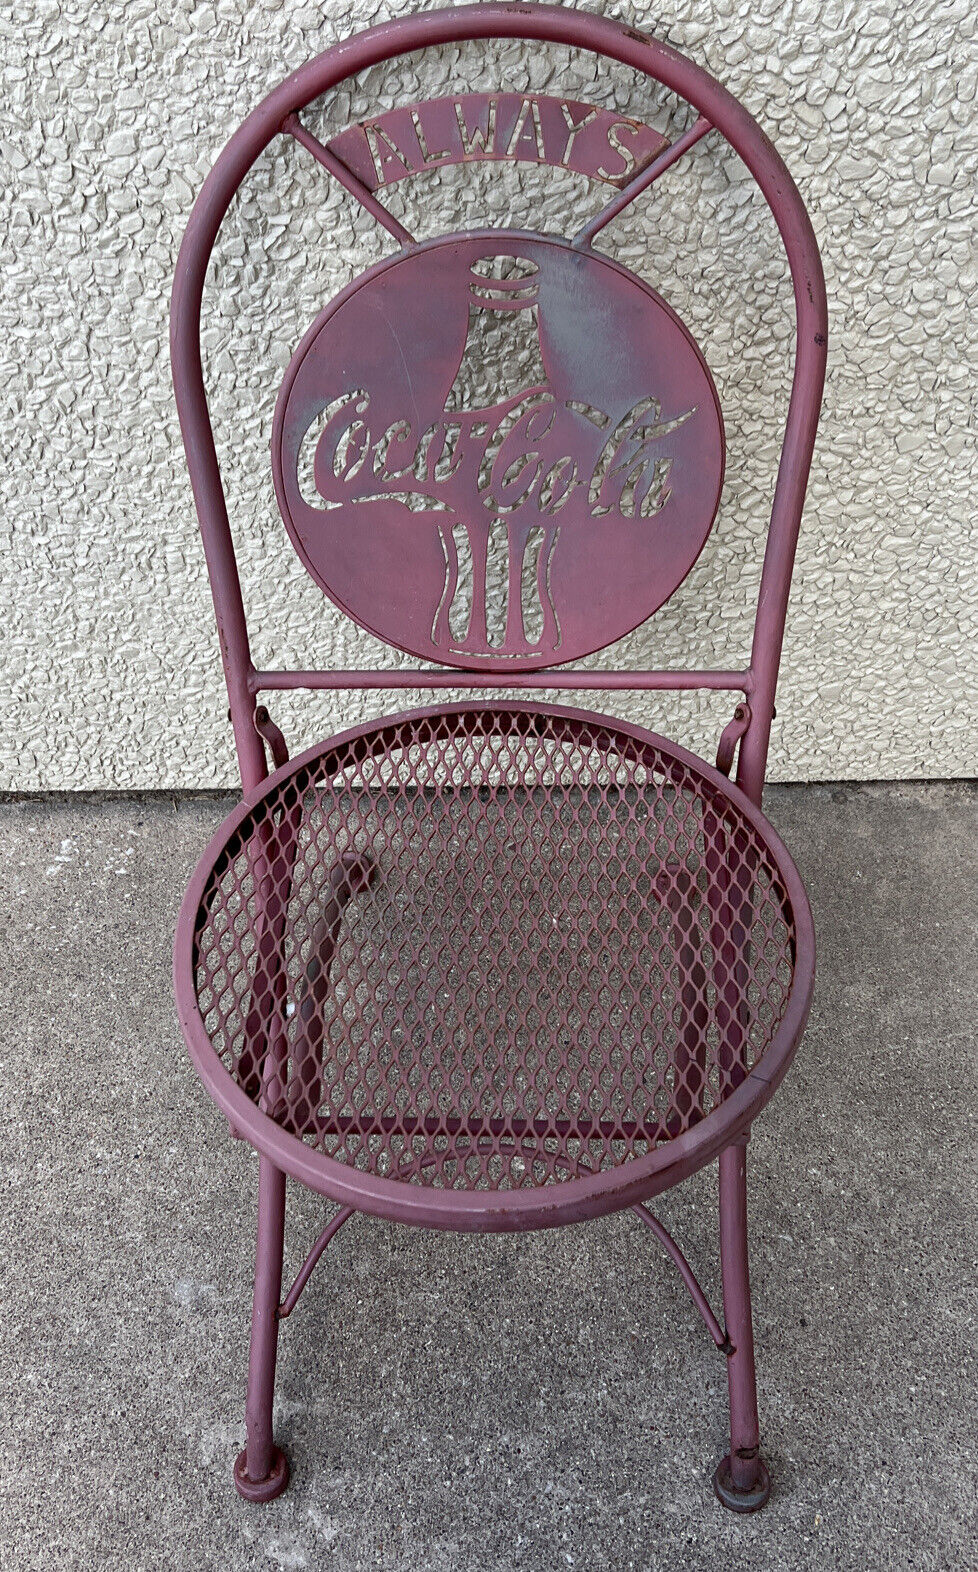 1993 Vintage Always Coke Coca Cola Metal Weathered Red Outdoor Folding Chair ￼